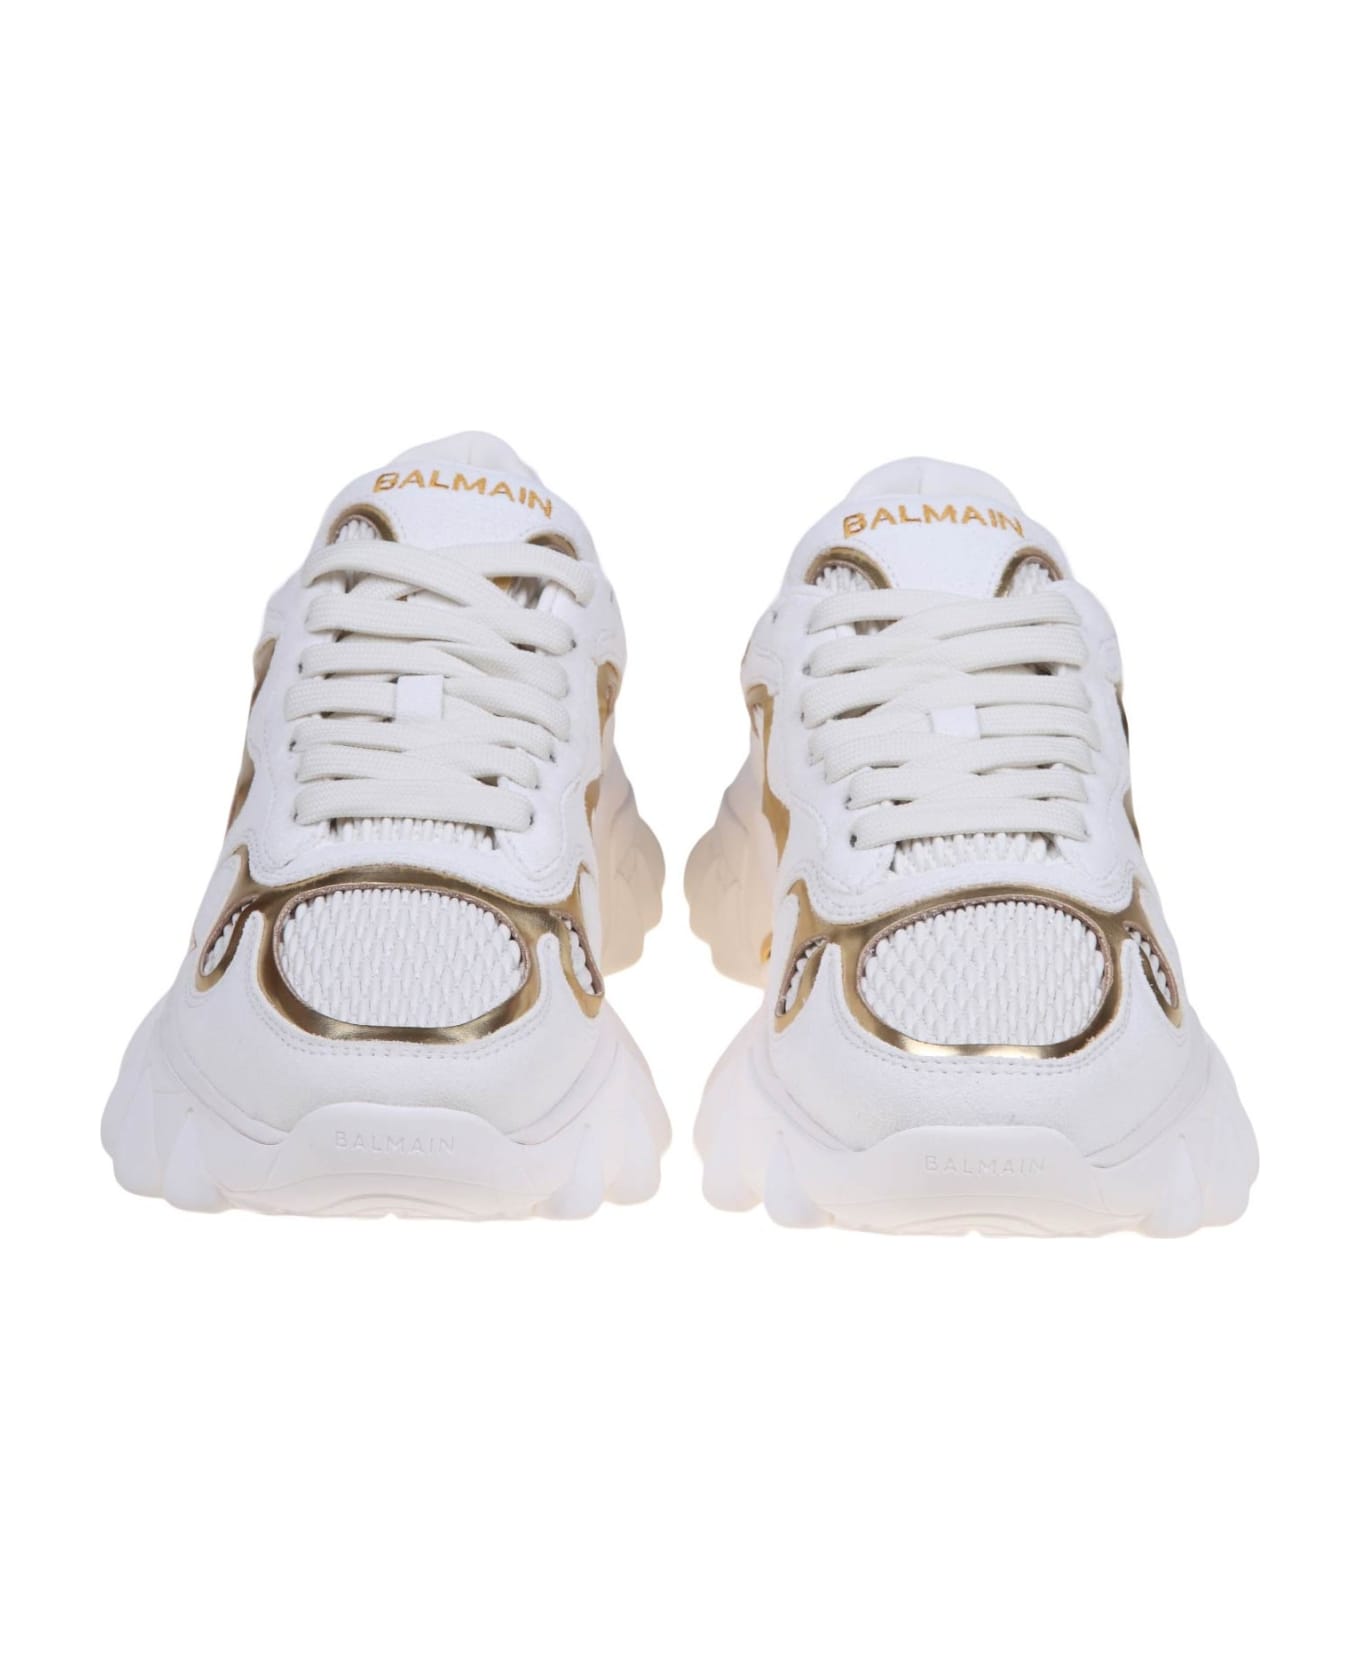 Balmain B-east Sneakers In White And Gold Suede And Leather - White/Gold